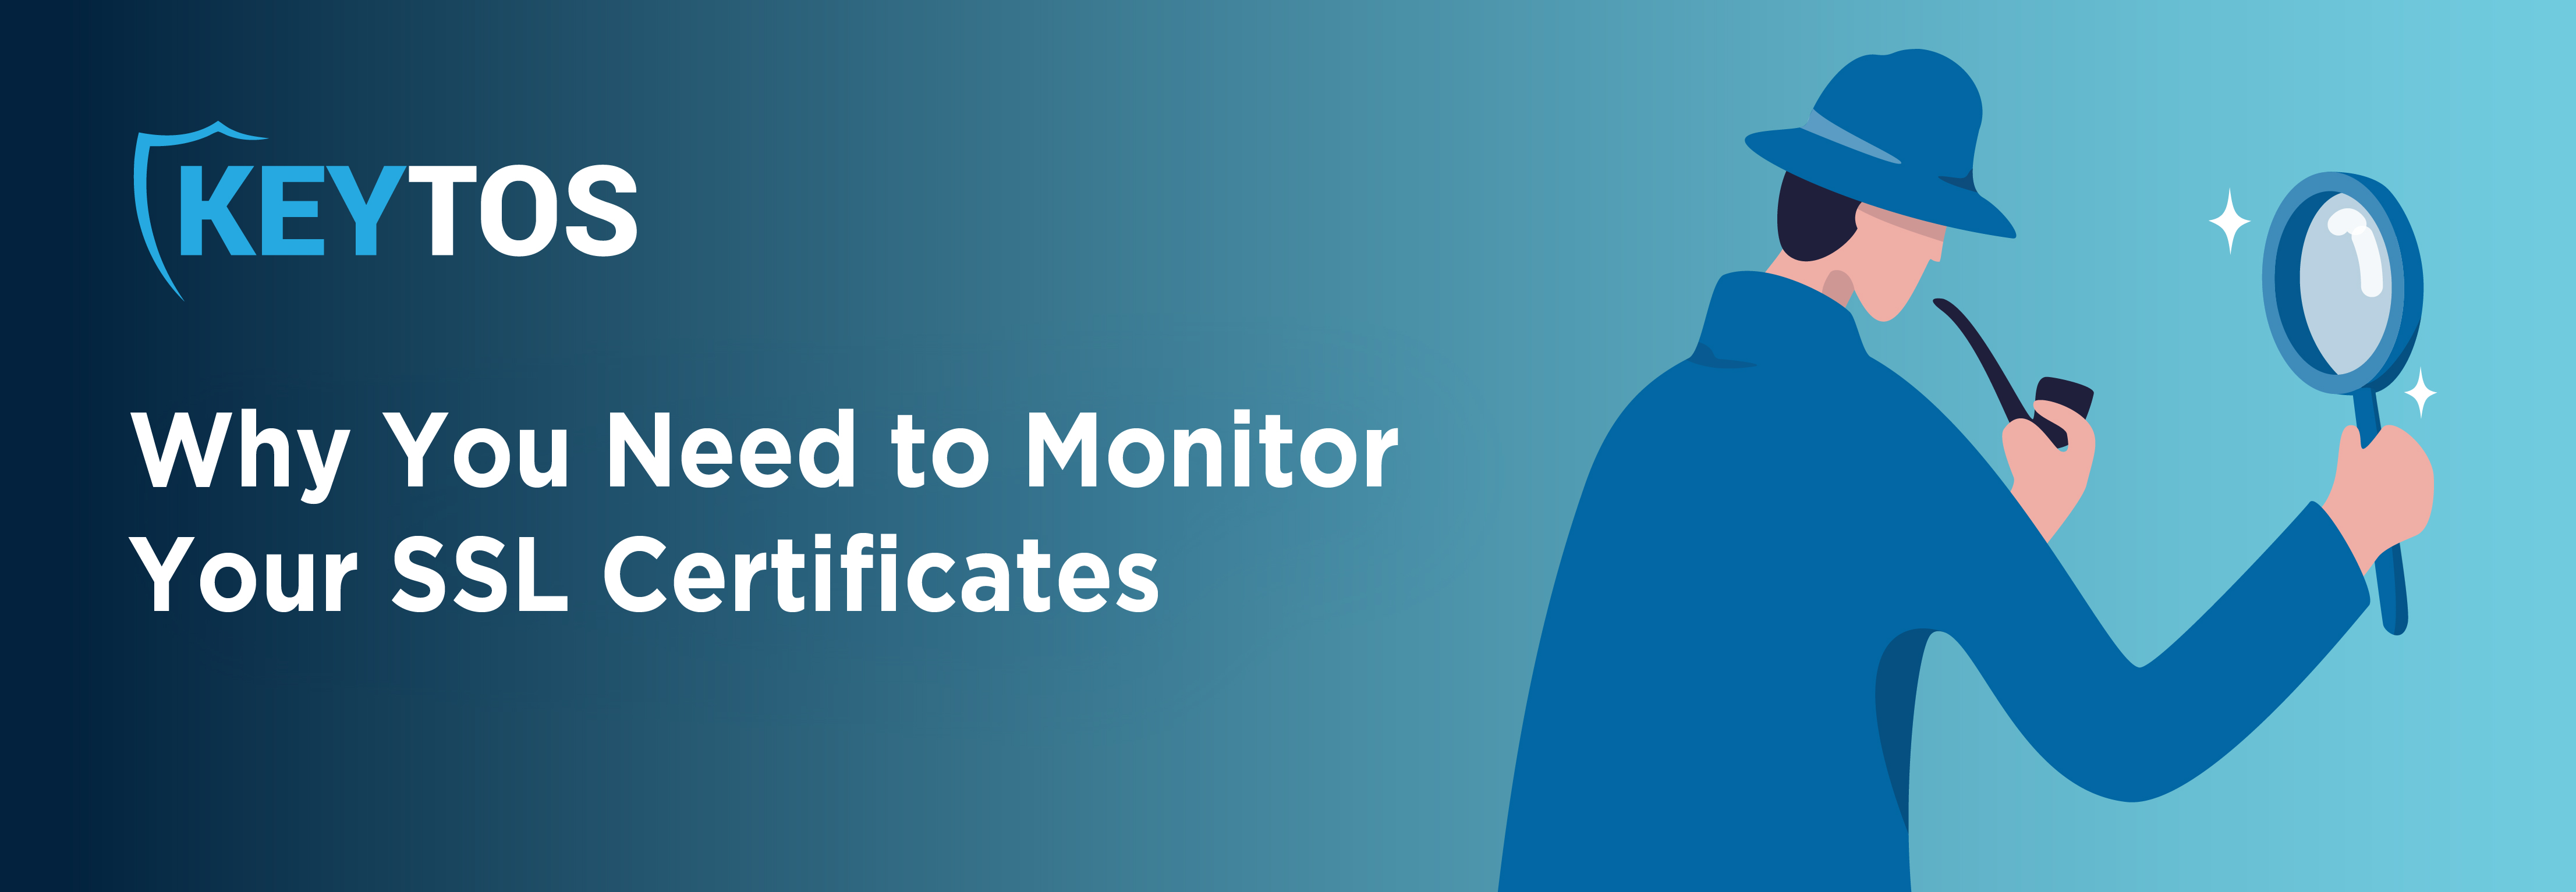 Why You Need To Monitor Your SSL Certificates